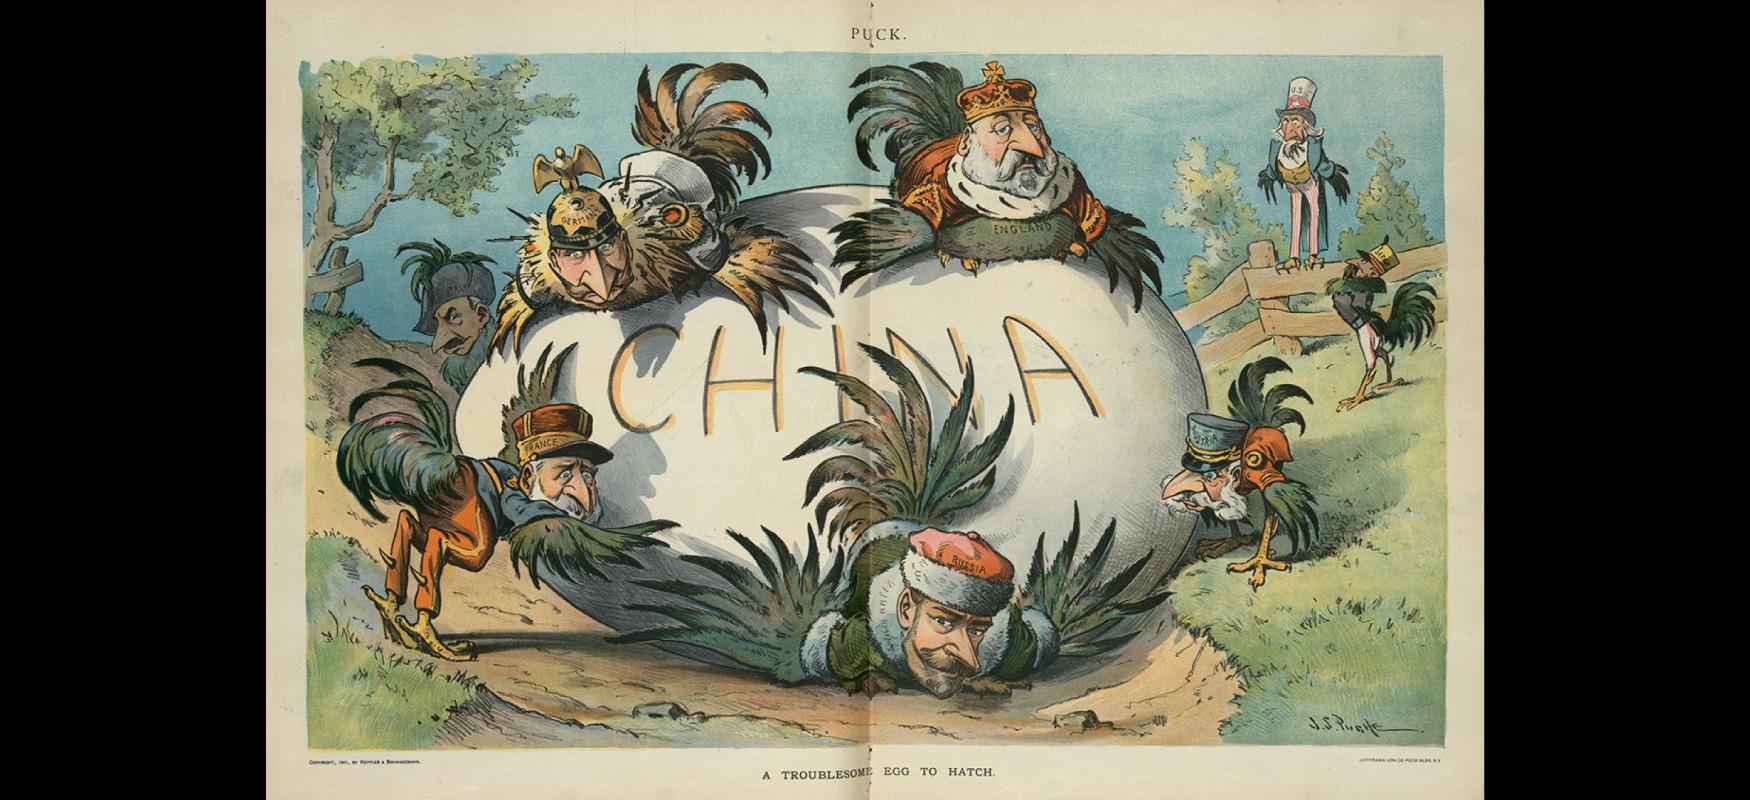 A cartoon drawing shows a large white egg labeled “China” lying on its side in the middle of a dirt road. The cartoon includes eight chickens, each with a man’s bearded face and wearing clothes. Underneath the egg, getting rolled over, is a chicken wearing a red and white king’s hat labeled “Russia” and a green coat with white trim. To the left pushing on the egg is a chicken in orange pants, a blue coat and a red hat labeled “France.” Atop the egg there are two chickens - the one on the left wears a white military coat and a helmet with a figure on it, labeled “Germany,” while the one on the right wears a gold and red king’s crown with a red coat with white and black trimmed fur. The belly is labeled “England.” To the bottom right of the egg is another chicken wearing a blue top hat labelled “Austria” and a red coat, sticking its tongue out at the Russian chicken. A chicken stands in the background on the right wearing red striped white pants and a black coat, a hat labelled with “Japan.” A chicken that is dressed in a long blue coat, yellow vest and white pants with red stripes and a hat labelled “U.S.” is perched on a fence in the rear right. A man’s head with a black helmet with “Italy” written on it is peeking out from behind the egg on the left. Grass and trees are in the background.